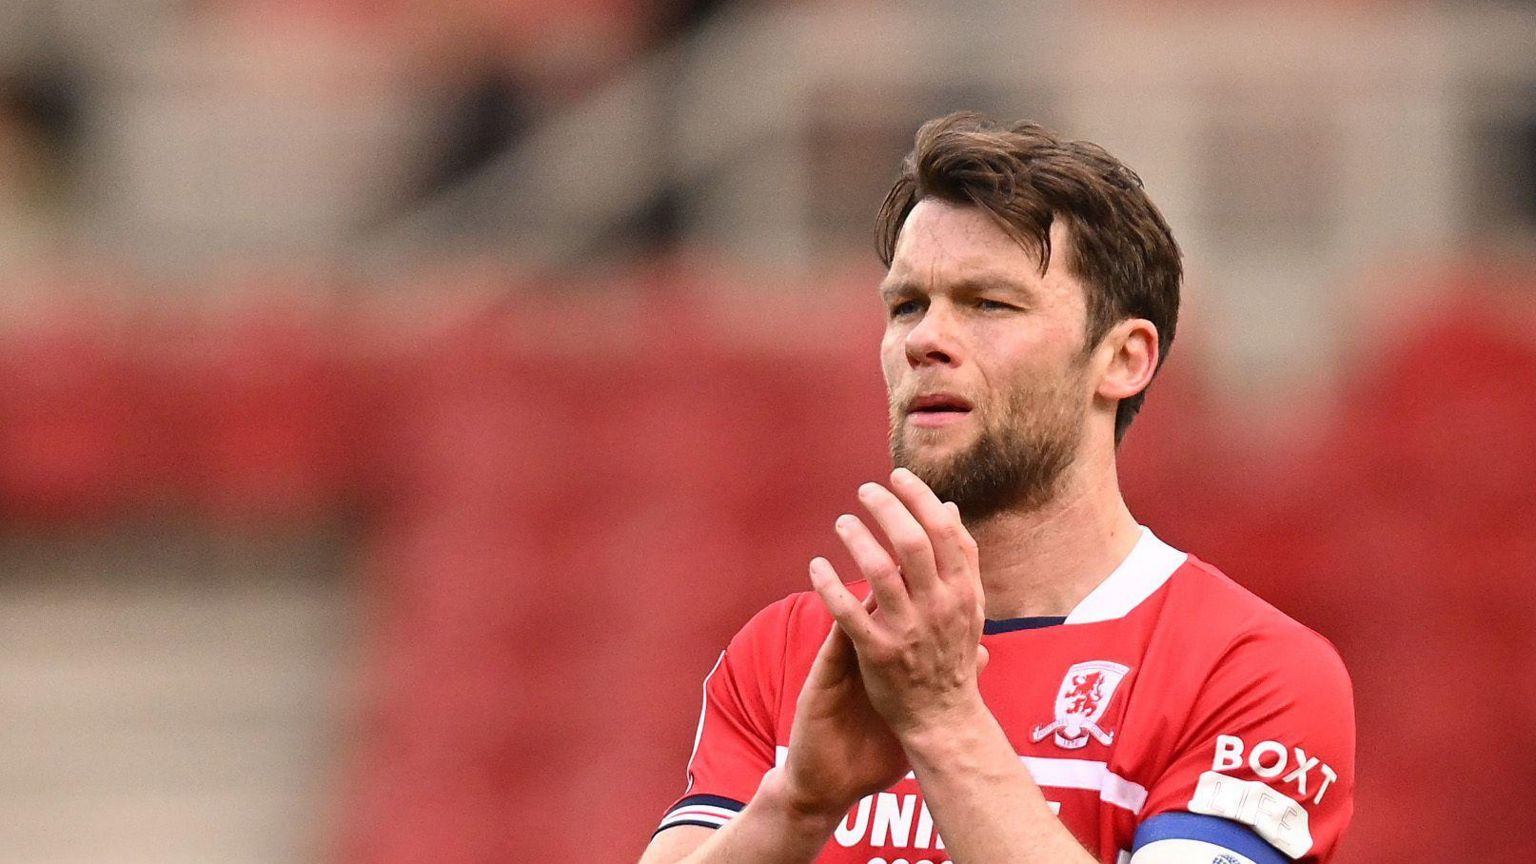 Jonny Howson in action for Middlesbrough